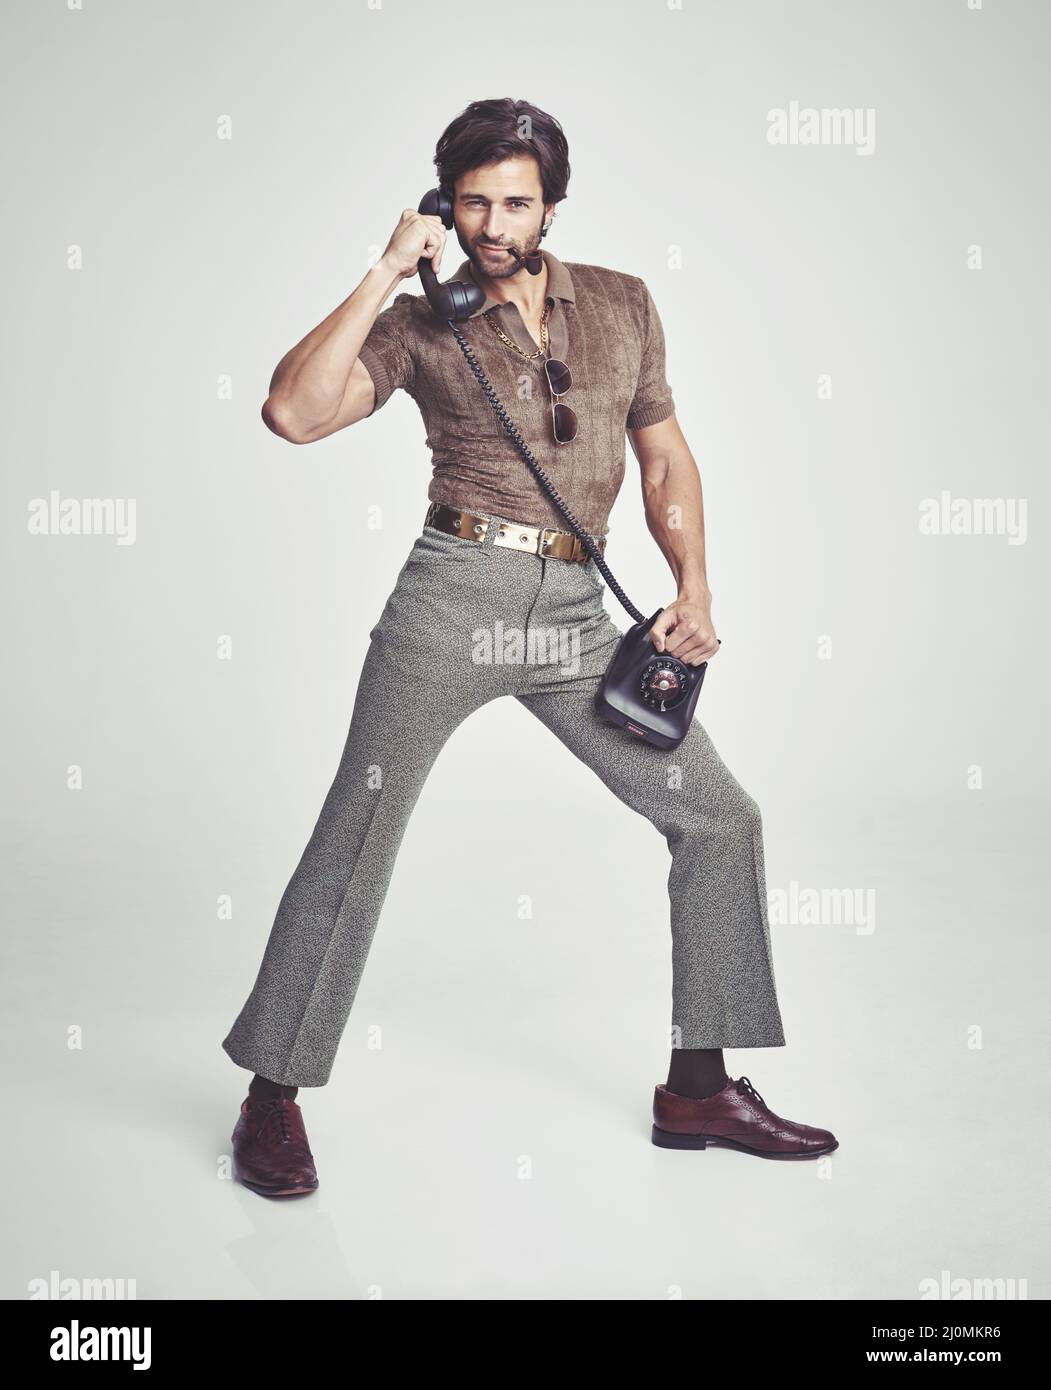 Doing everything with flair. A handsome man on a retro telephone while striking a pose. Stock Photo